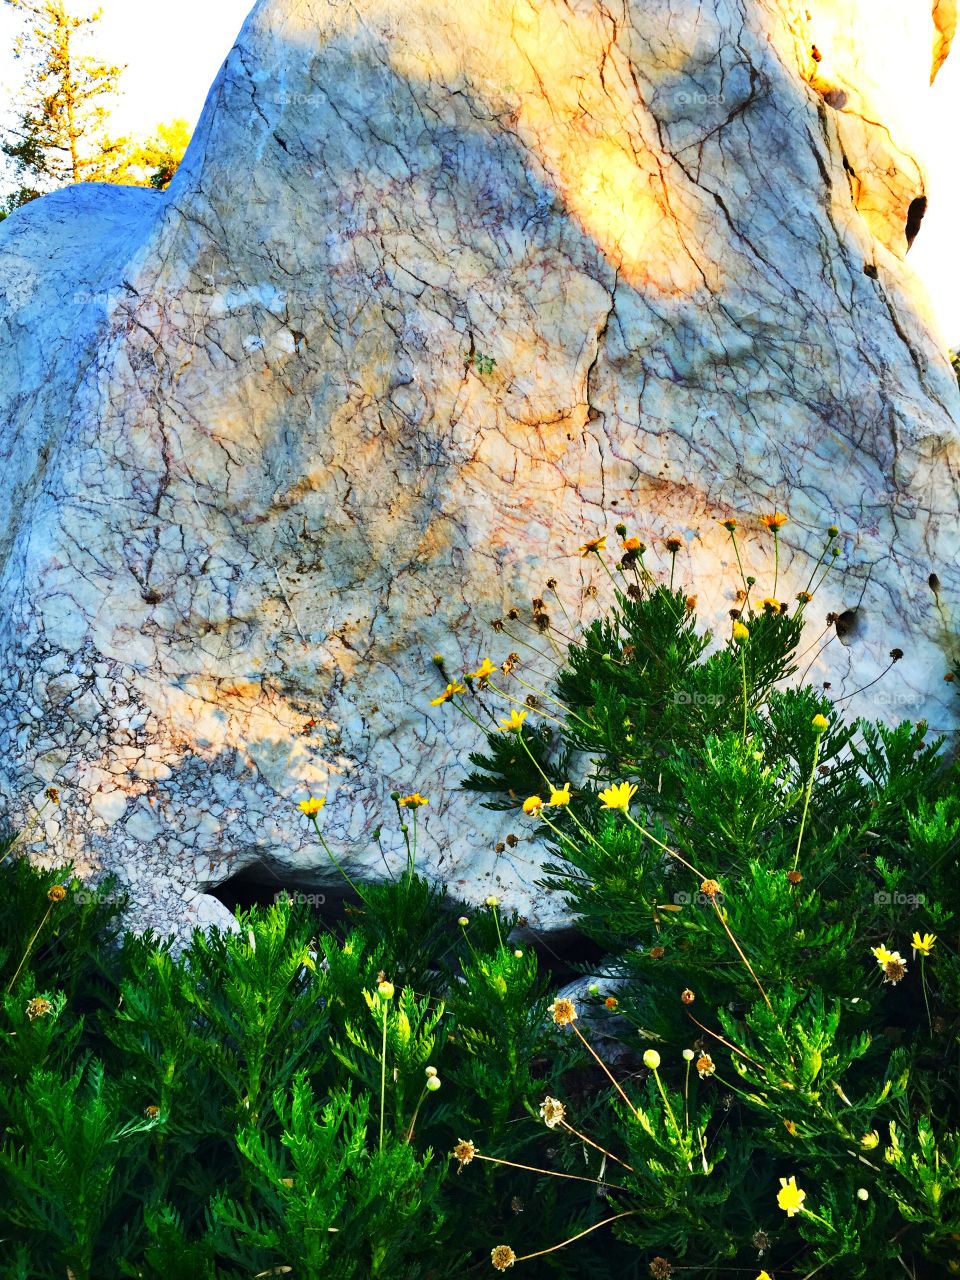 Flowers against a rock